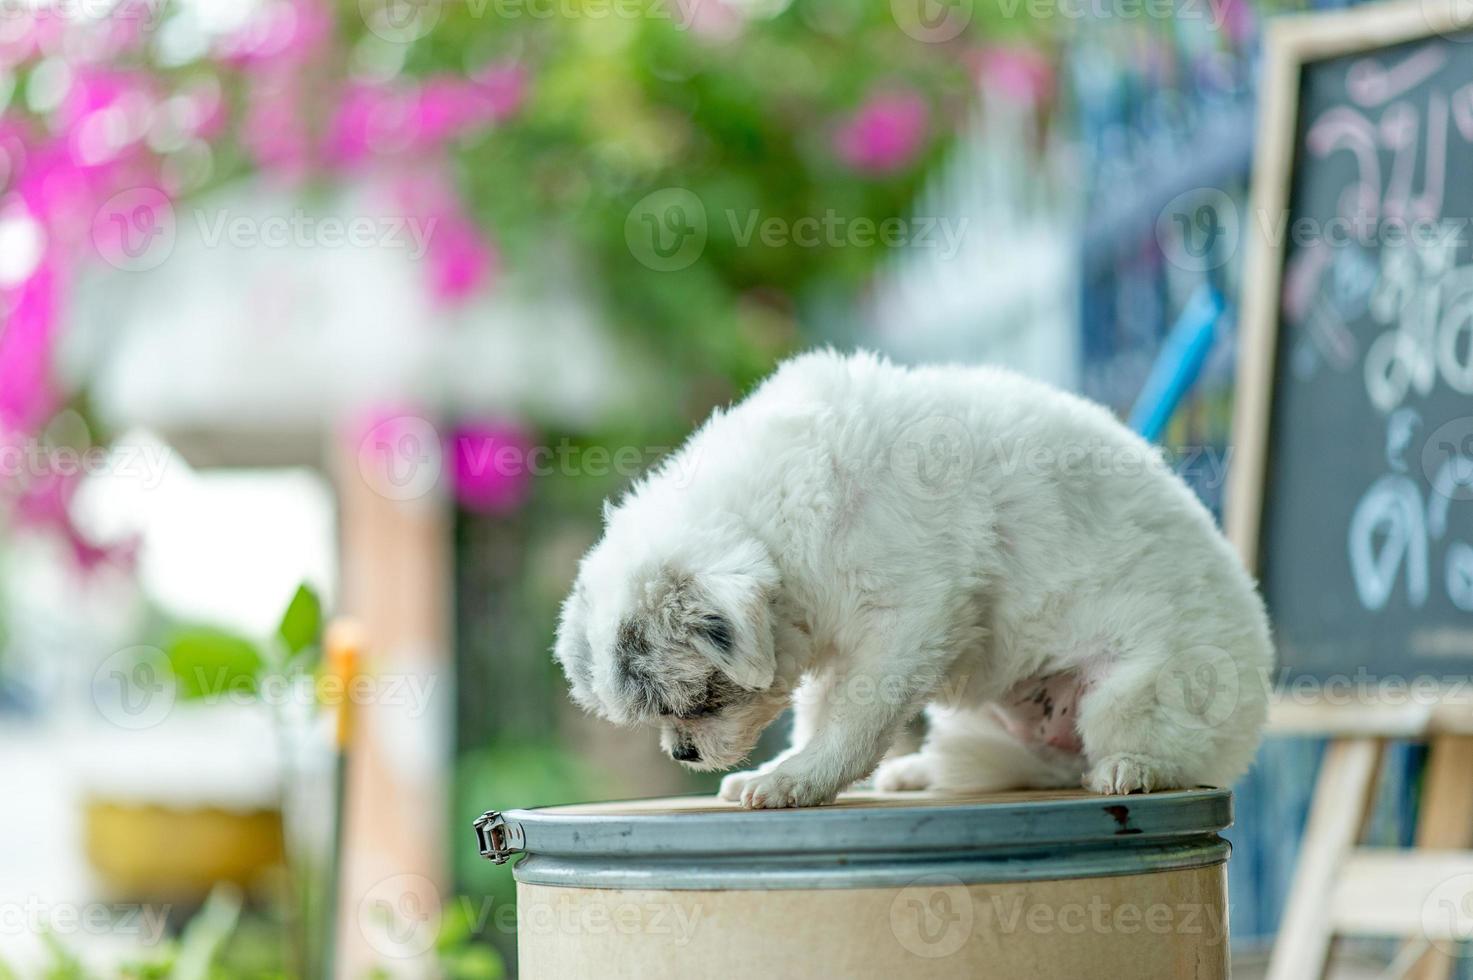 White dog picture, cute photo shoot, love dog concept